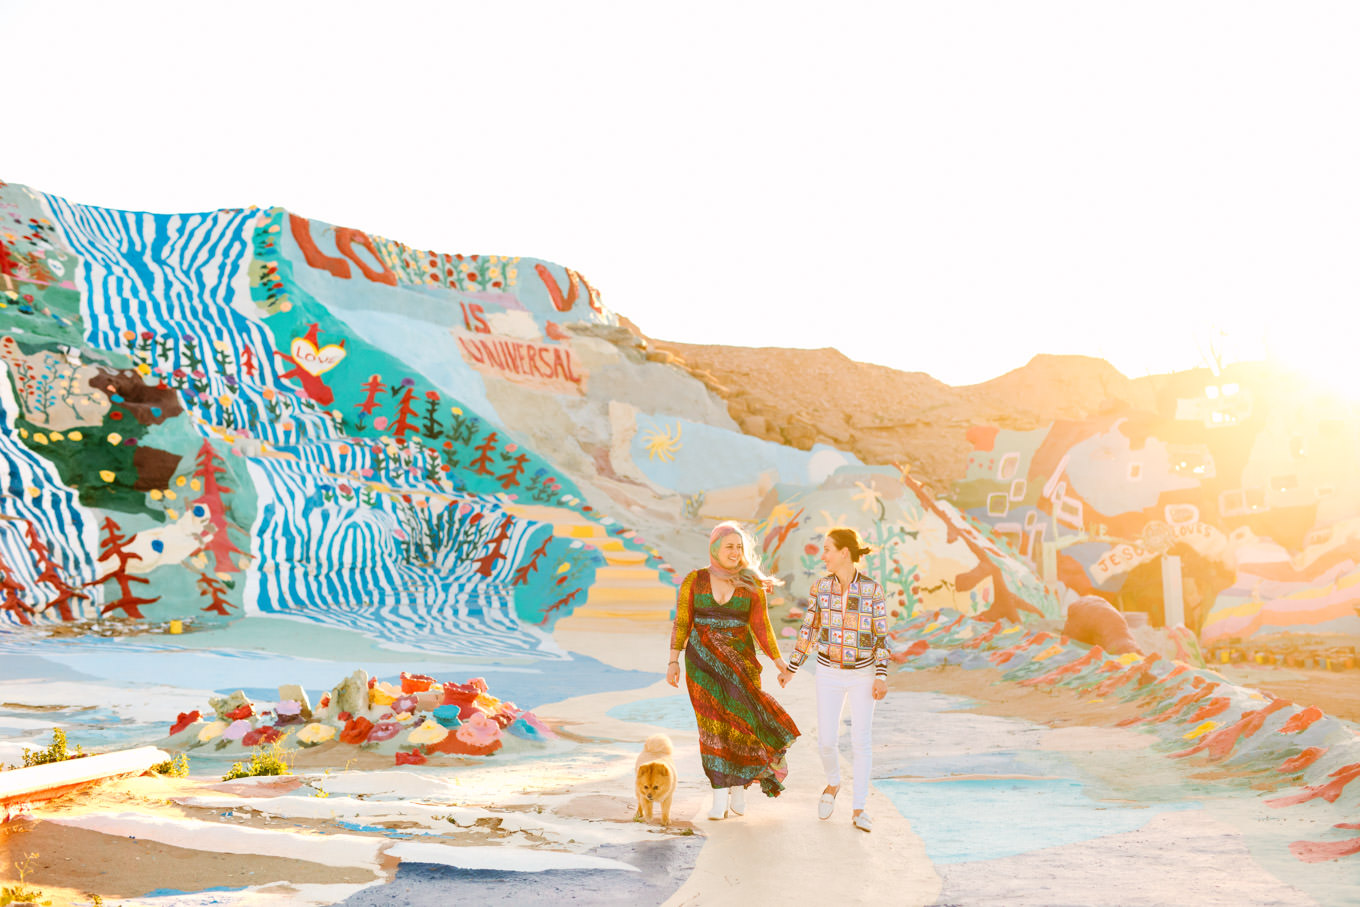 Salvation Mountain engagement session | Engagement, elopement, and wedding photography roundup of Mary Costa’s favorite images from 2020 | Colorful and elevated photography for fun-loving couples in Southern California | #2020wedding #elopement #weddingphoto #weddingphotography   Source: Mary Costa Photography | Los Angeles